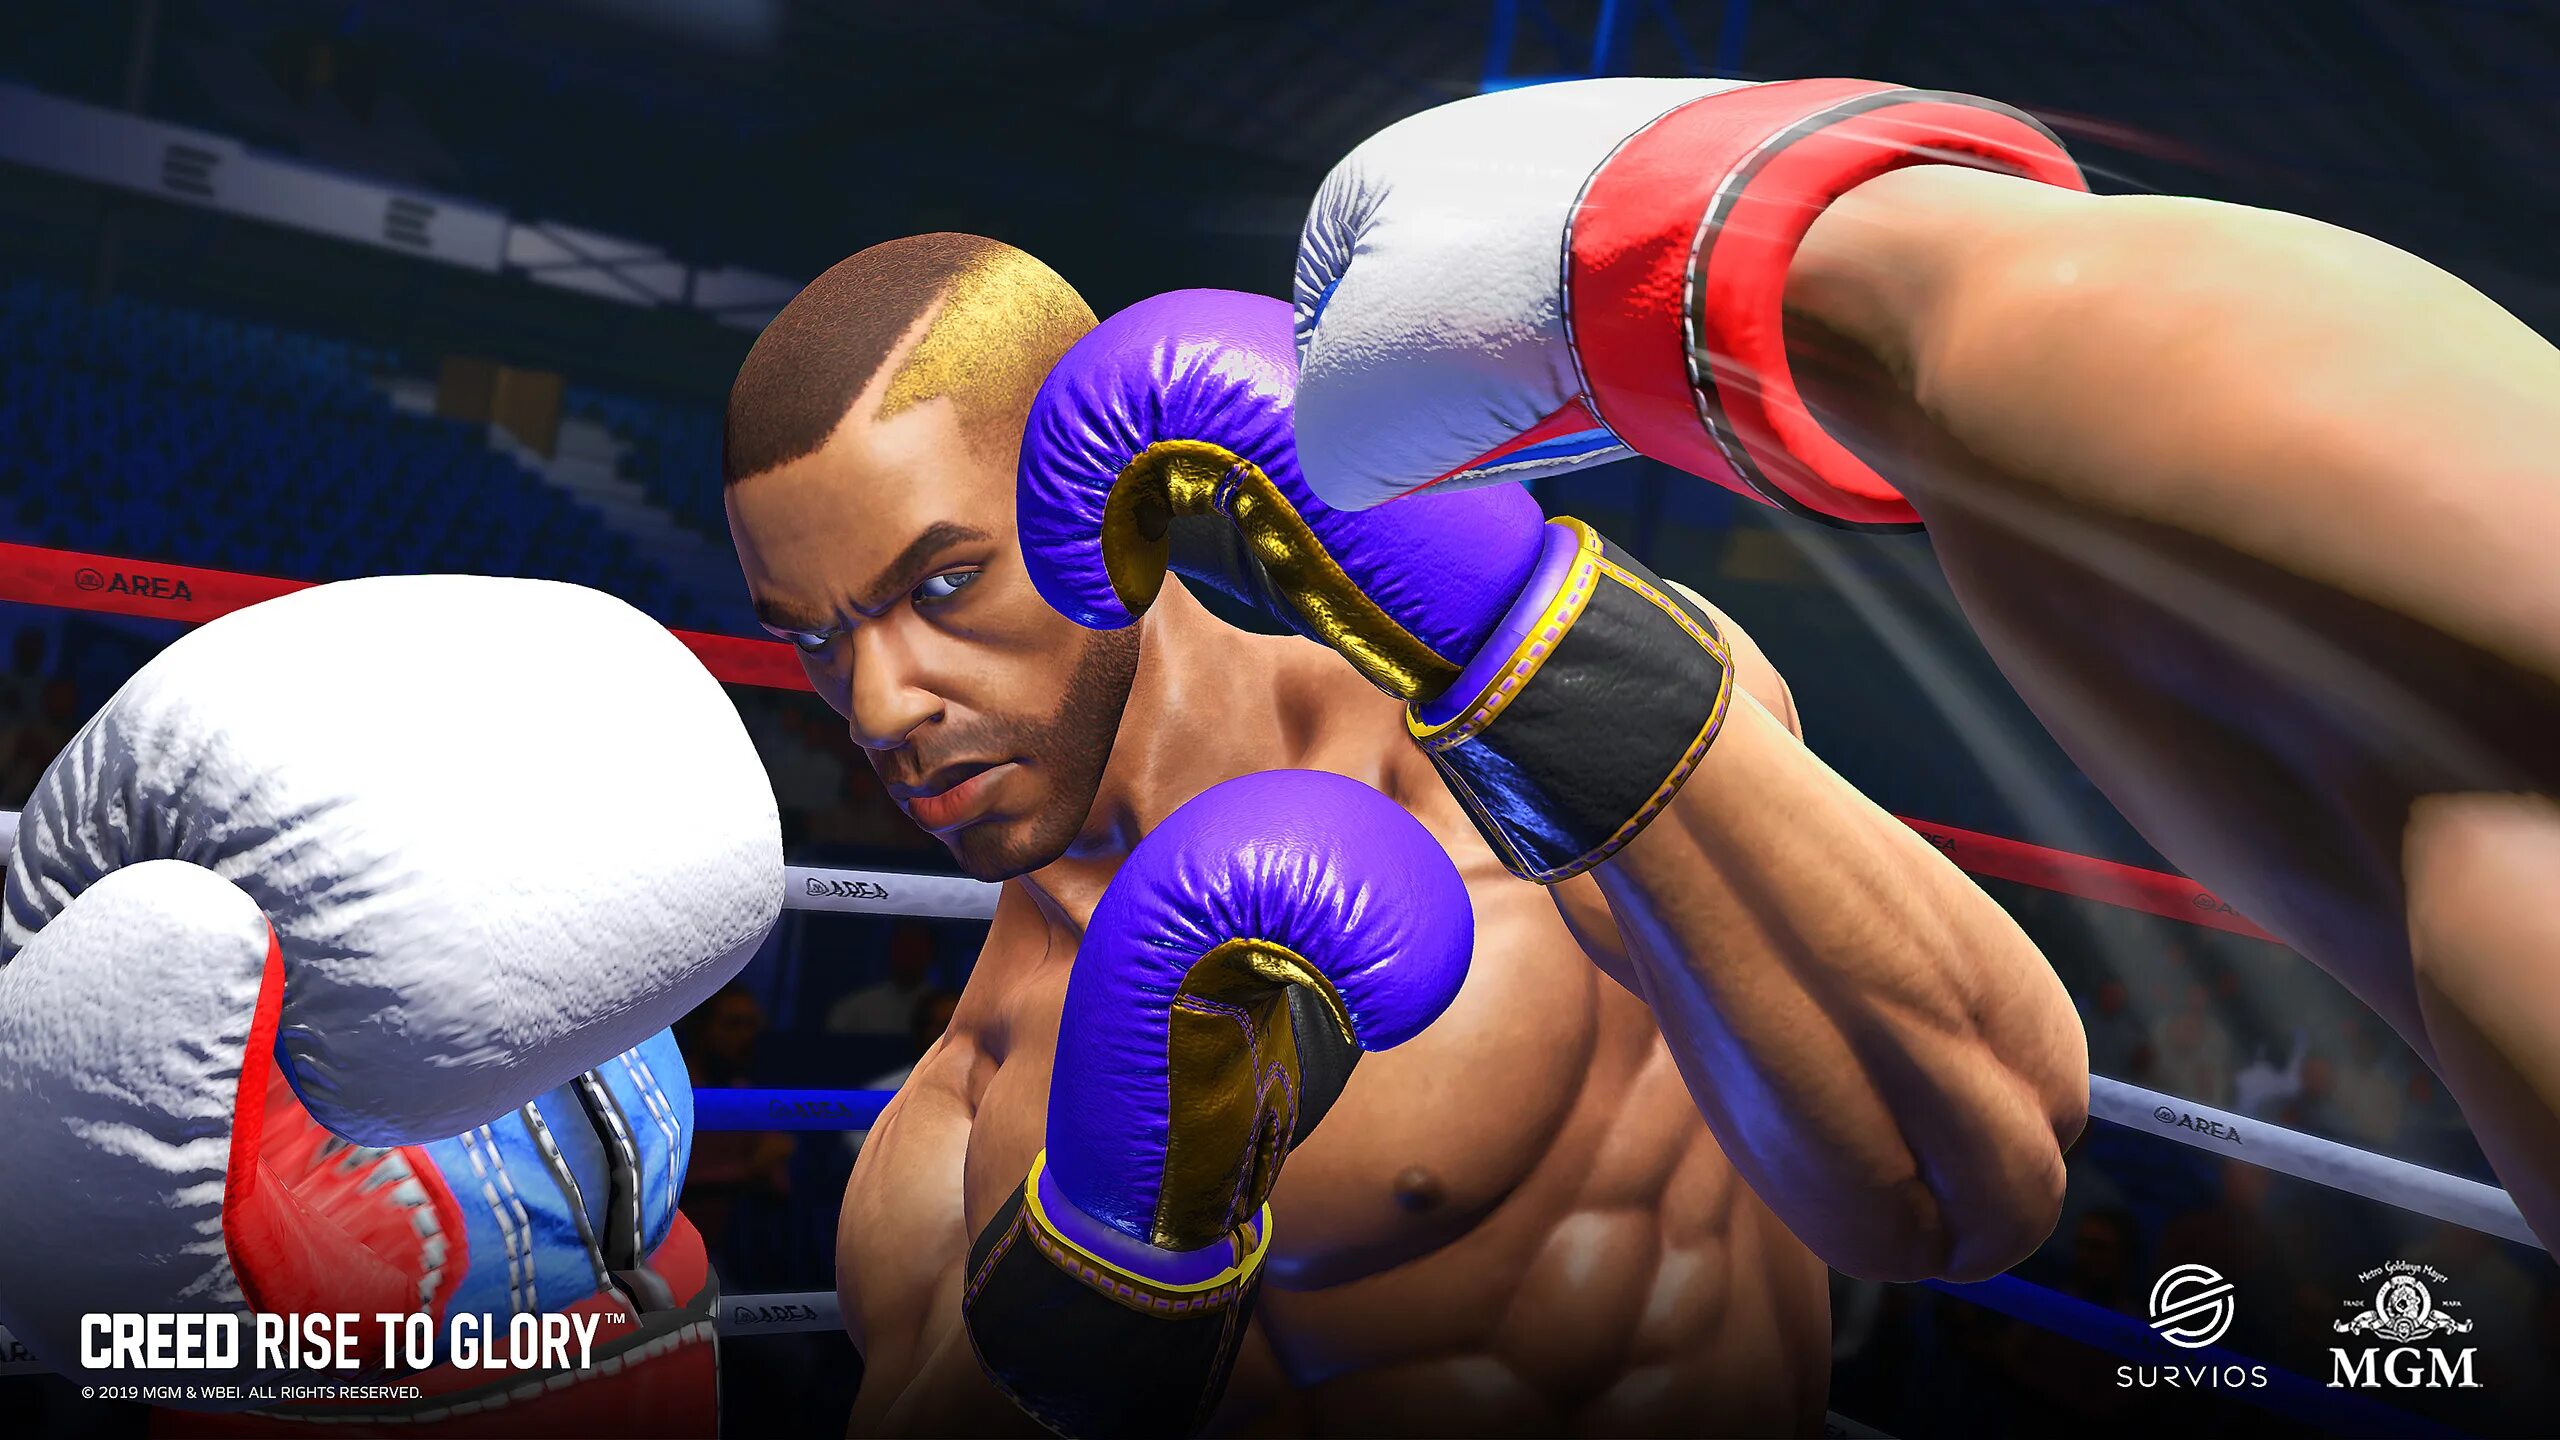 Creed glory vr. Creed Rise to Glory VR Oculus Quest 2. Oculus Quest 2 Creed. Бокс Крид VR. Oculus Quest 2 Box VR.